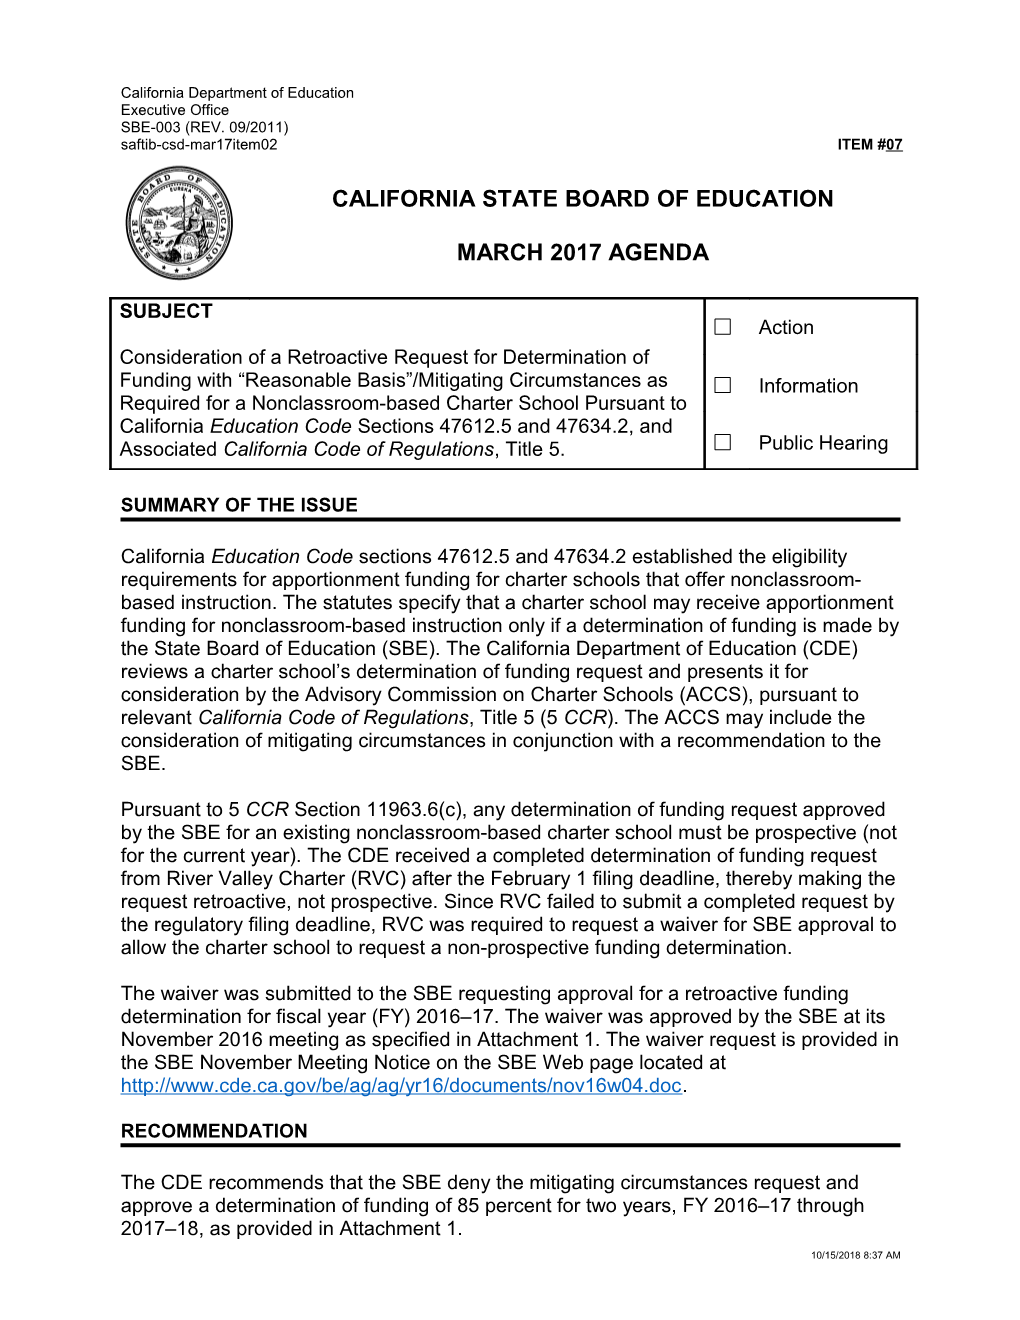 March 2017 Agenda Item 07 - Meeting Agendas (CA State Board of Education)